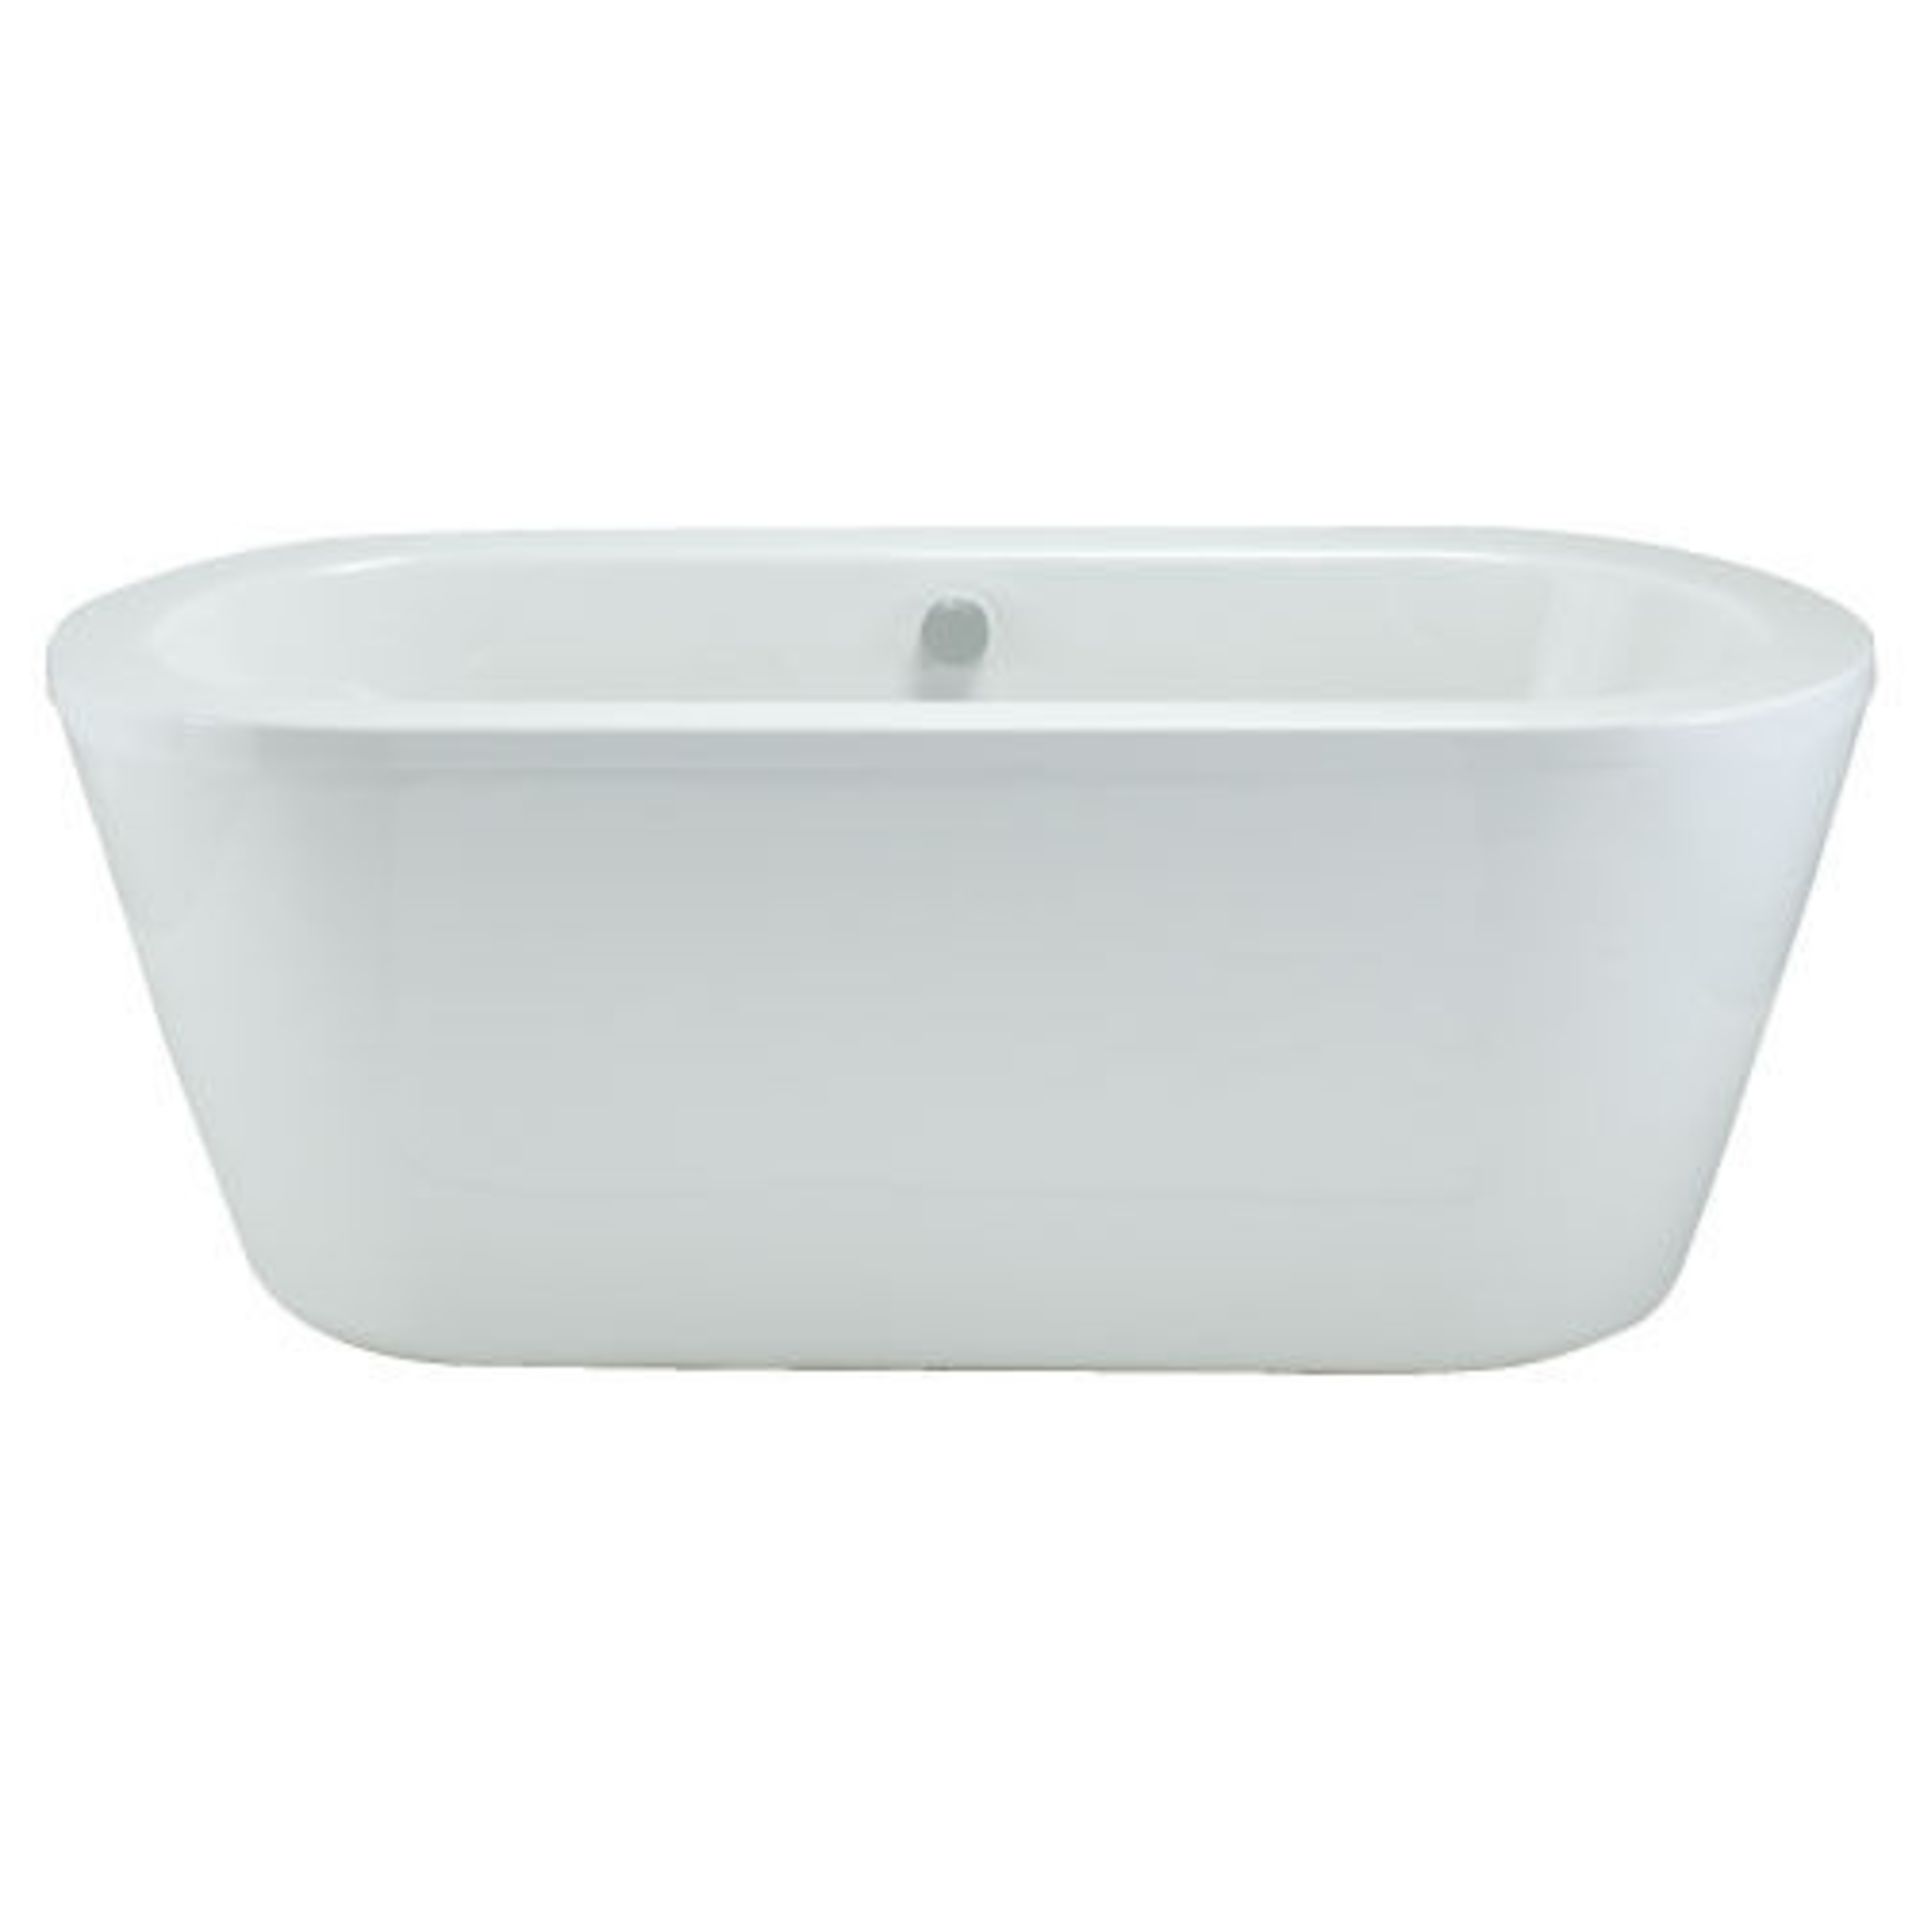 1500x800 double ended freestanding bath with surround RRP £749